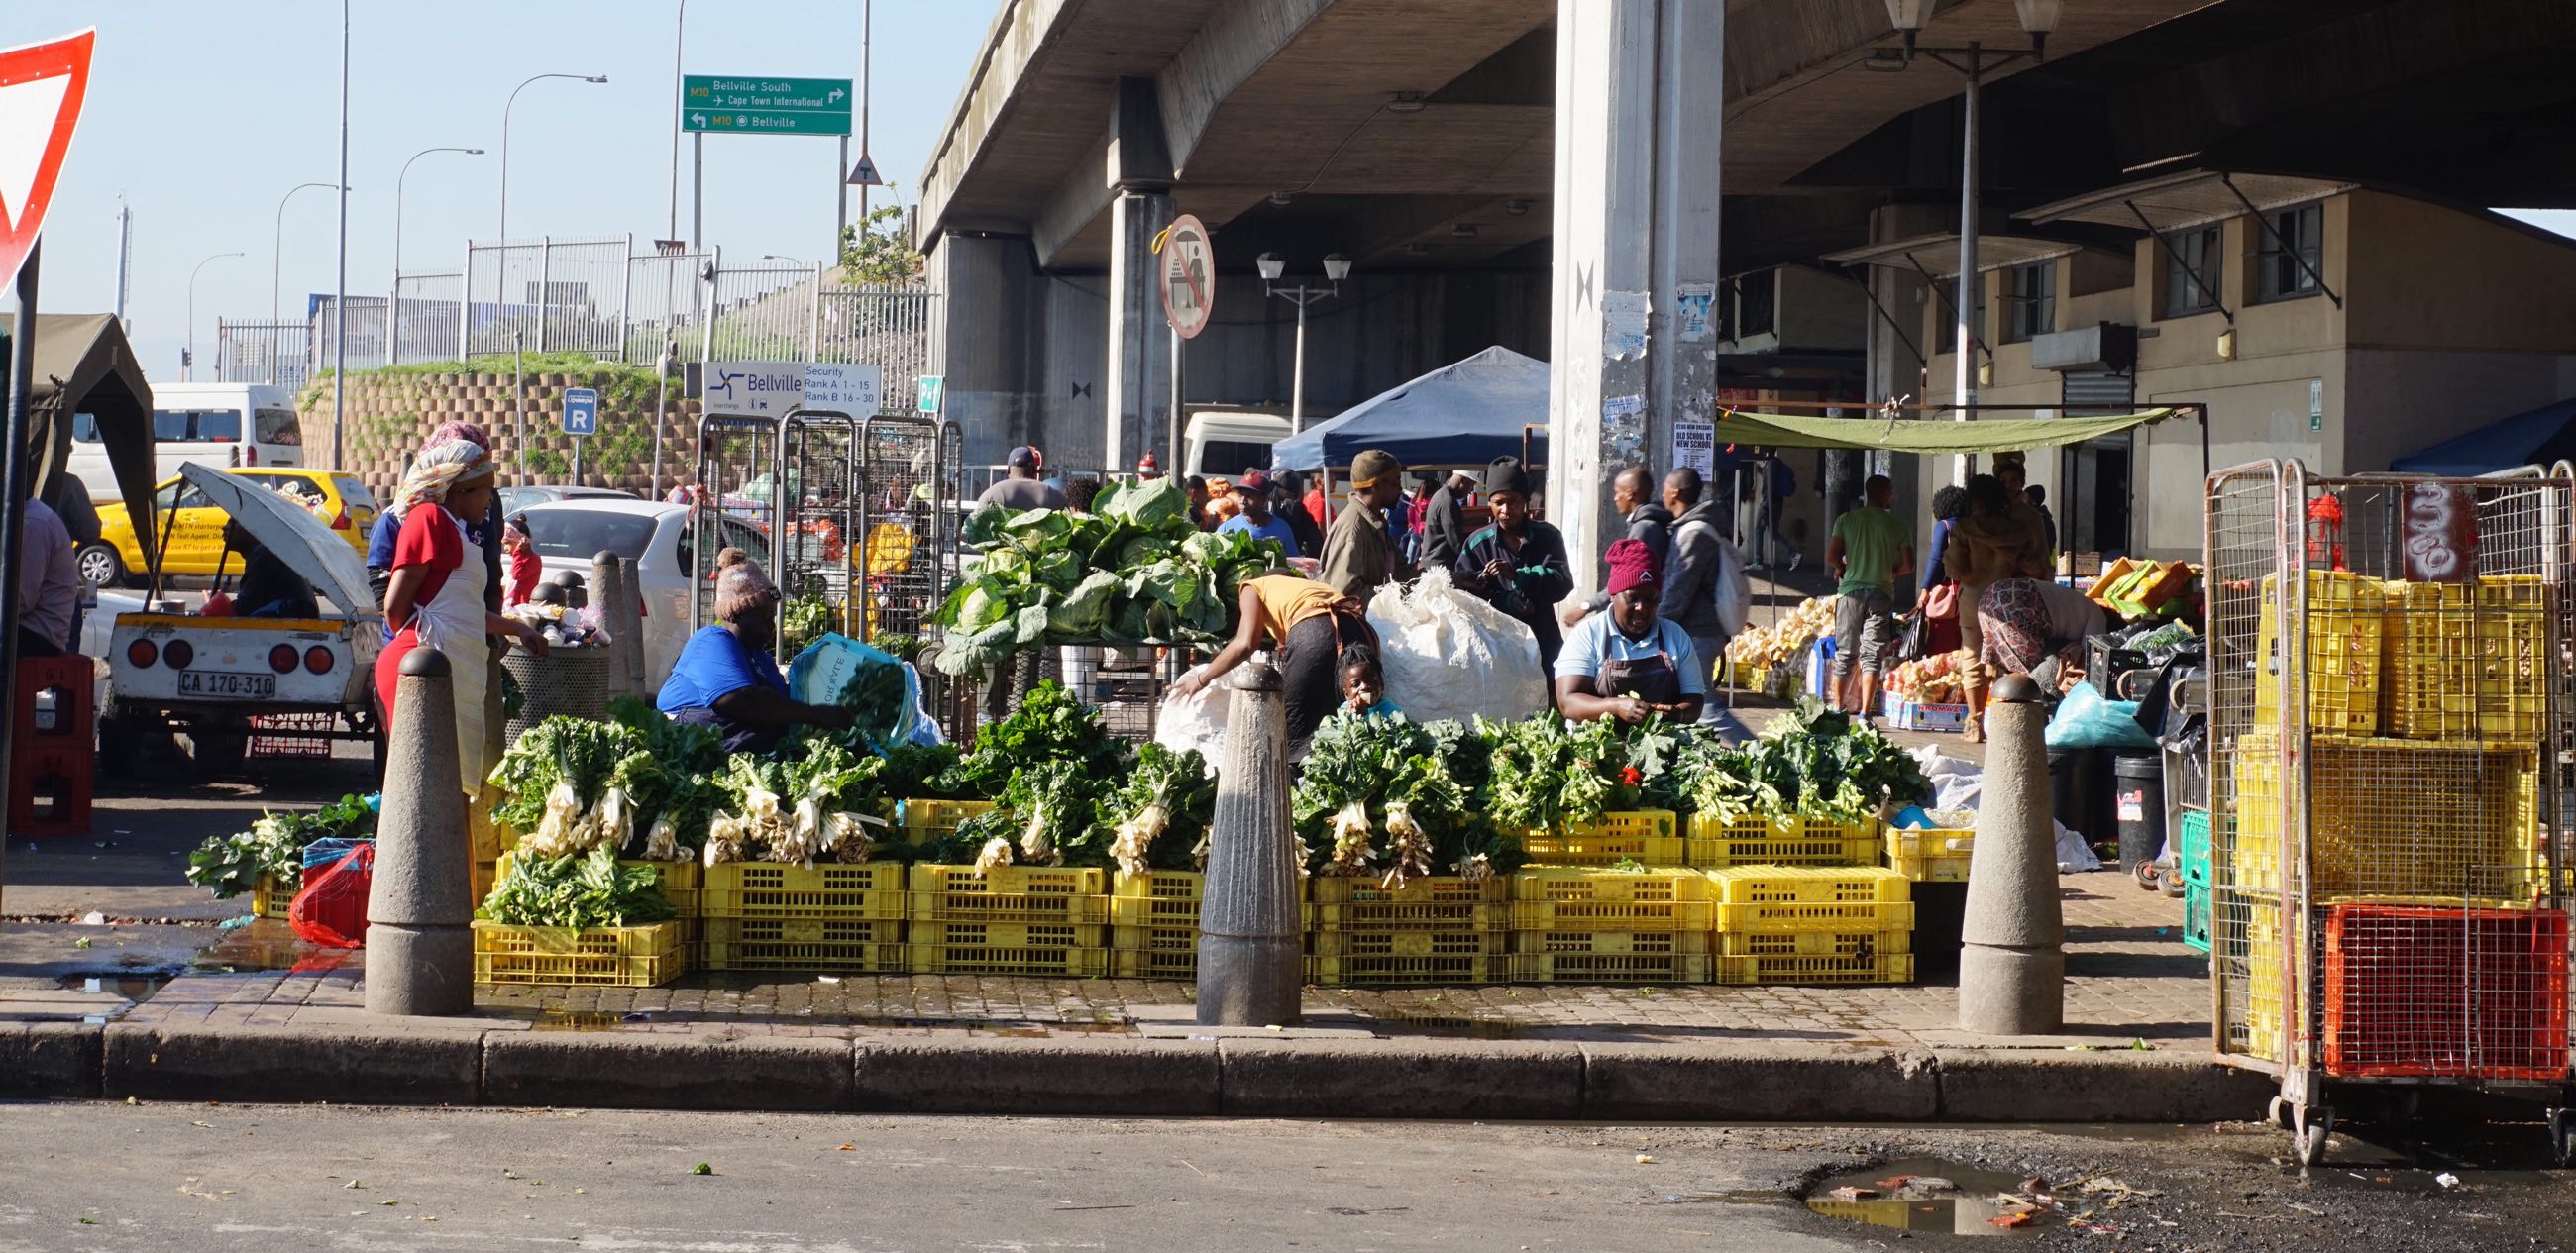 From scoping to action research: Implementation of five pathways for more resilient and inclusive urban food systems in Cape Town and Nairobi    